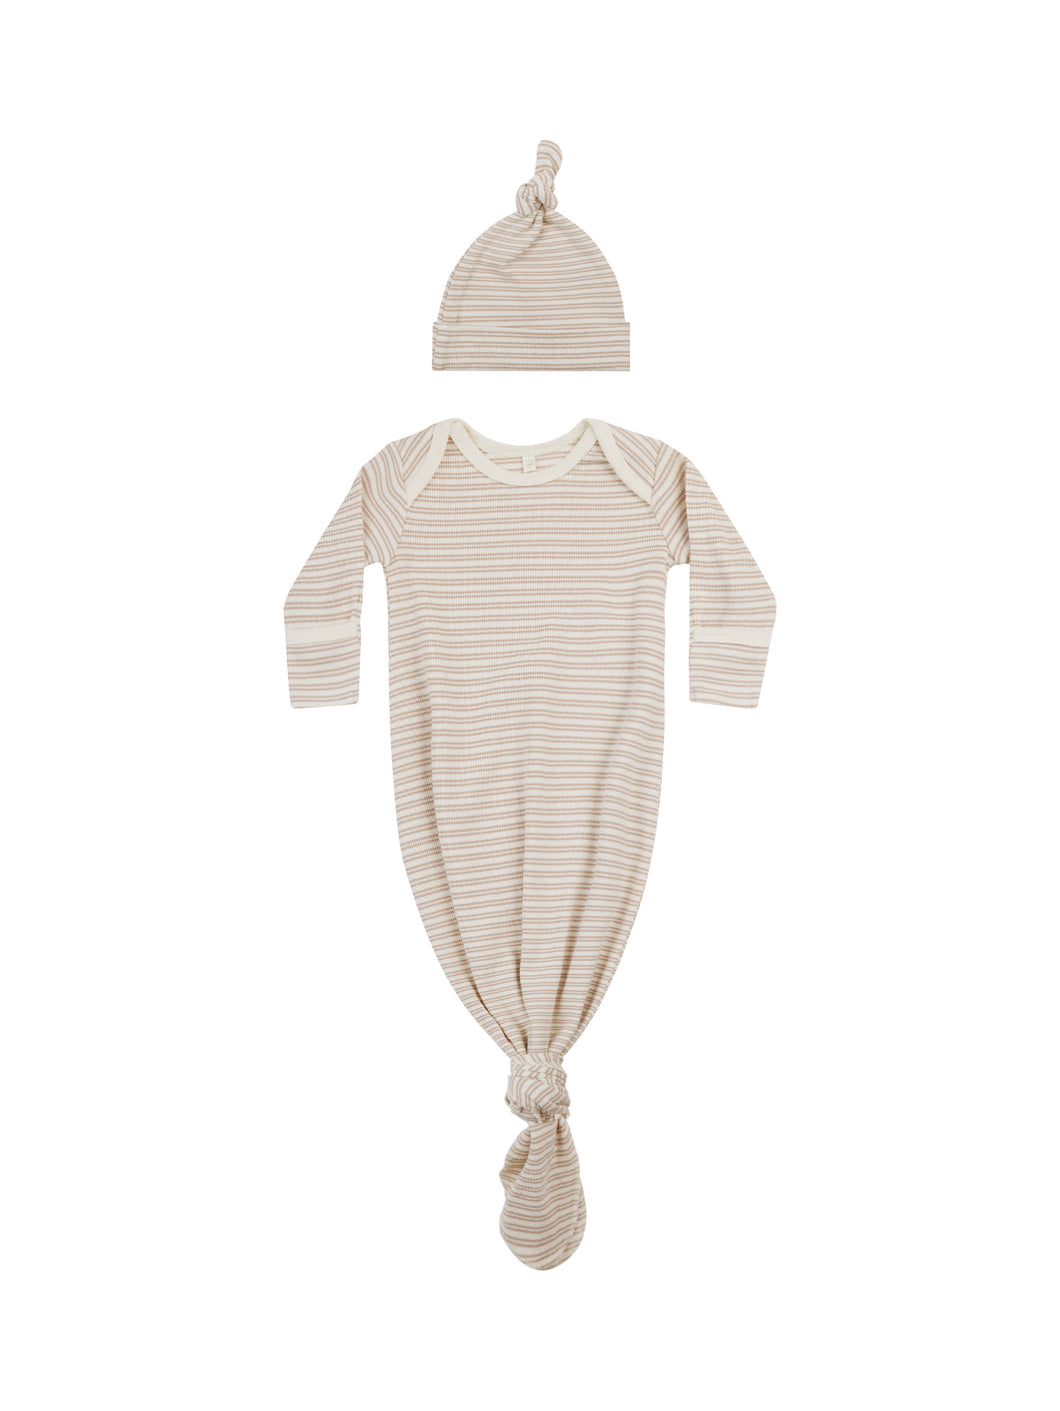 Oat Stripe Knotted Gown + Hat Set